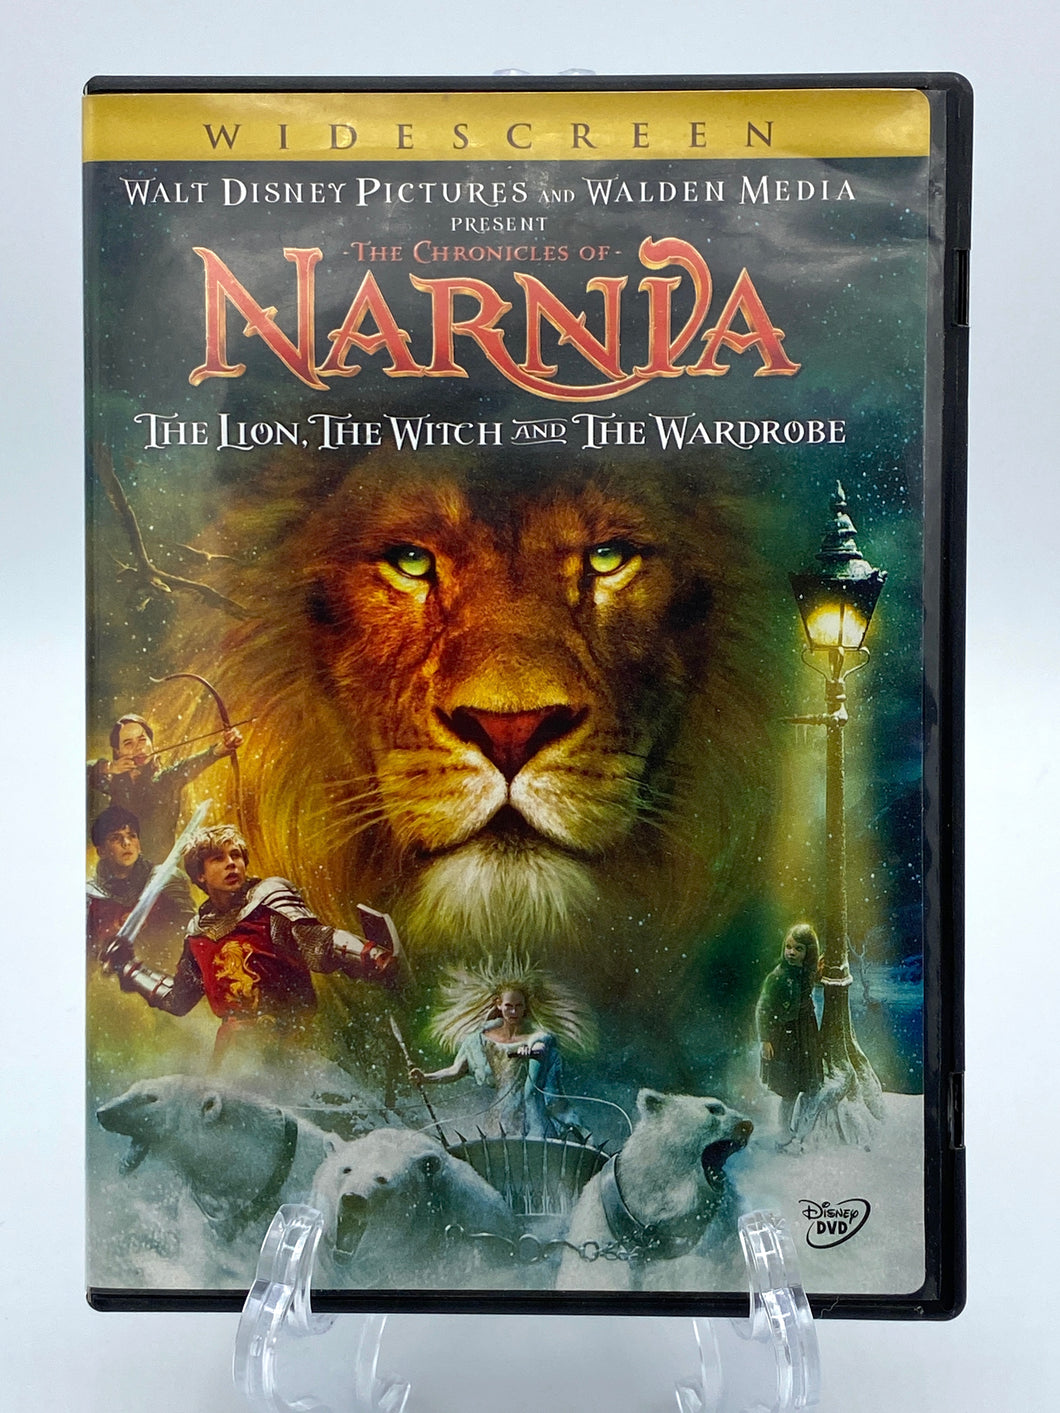 The Chronicles of Narnia: The Lion, The Witch and The Wardrobe (DVD)